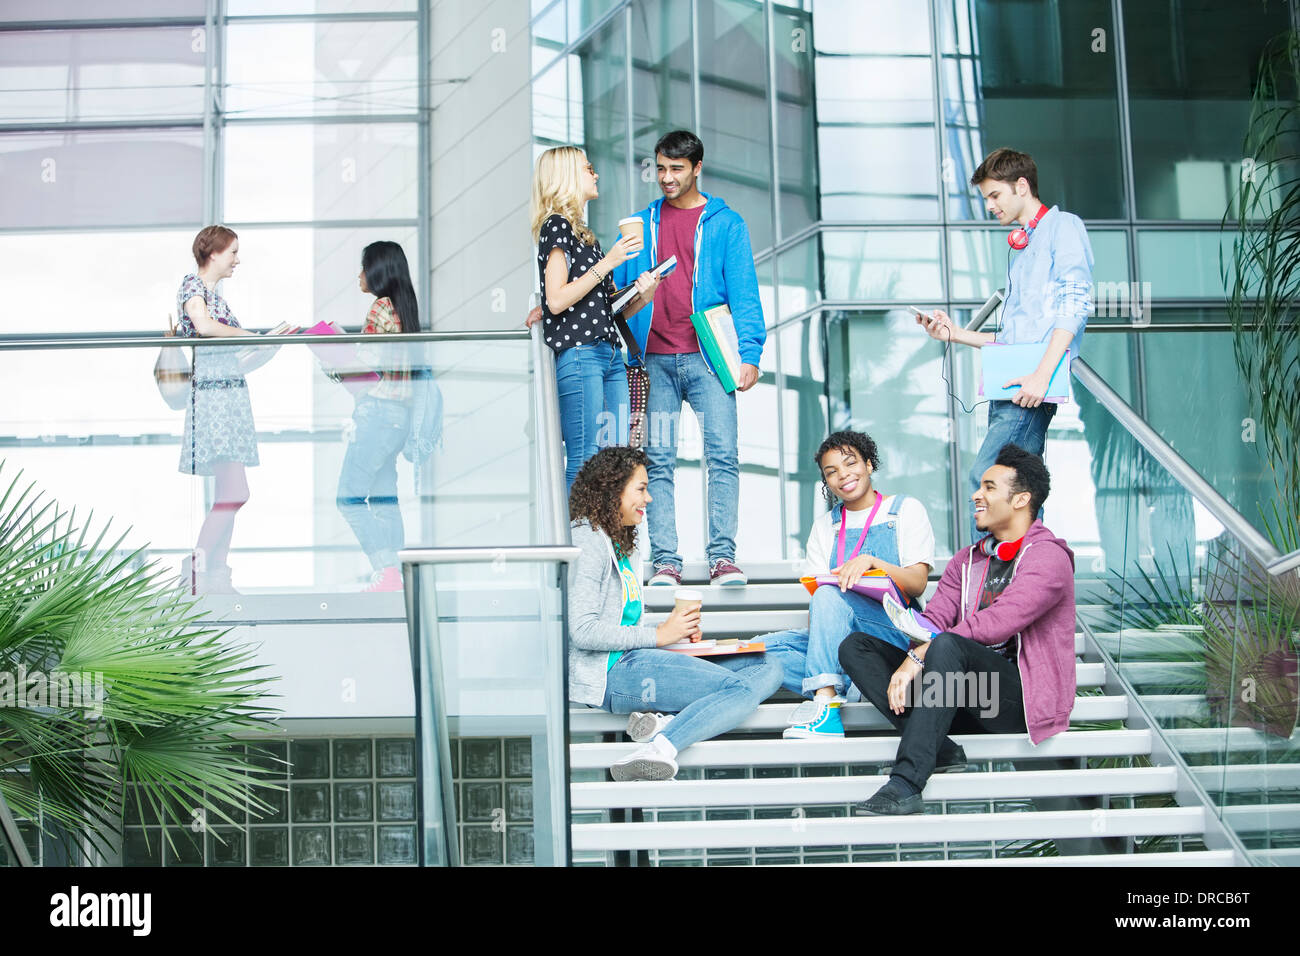 University students relaxing on steps Stock Photo